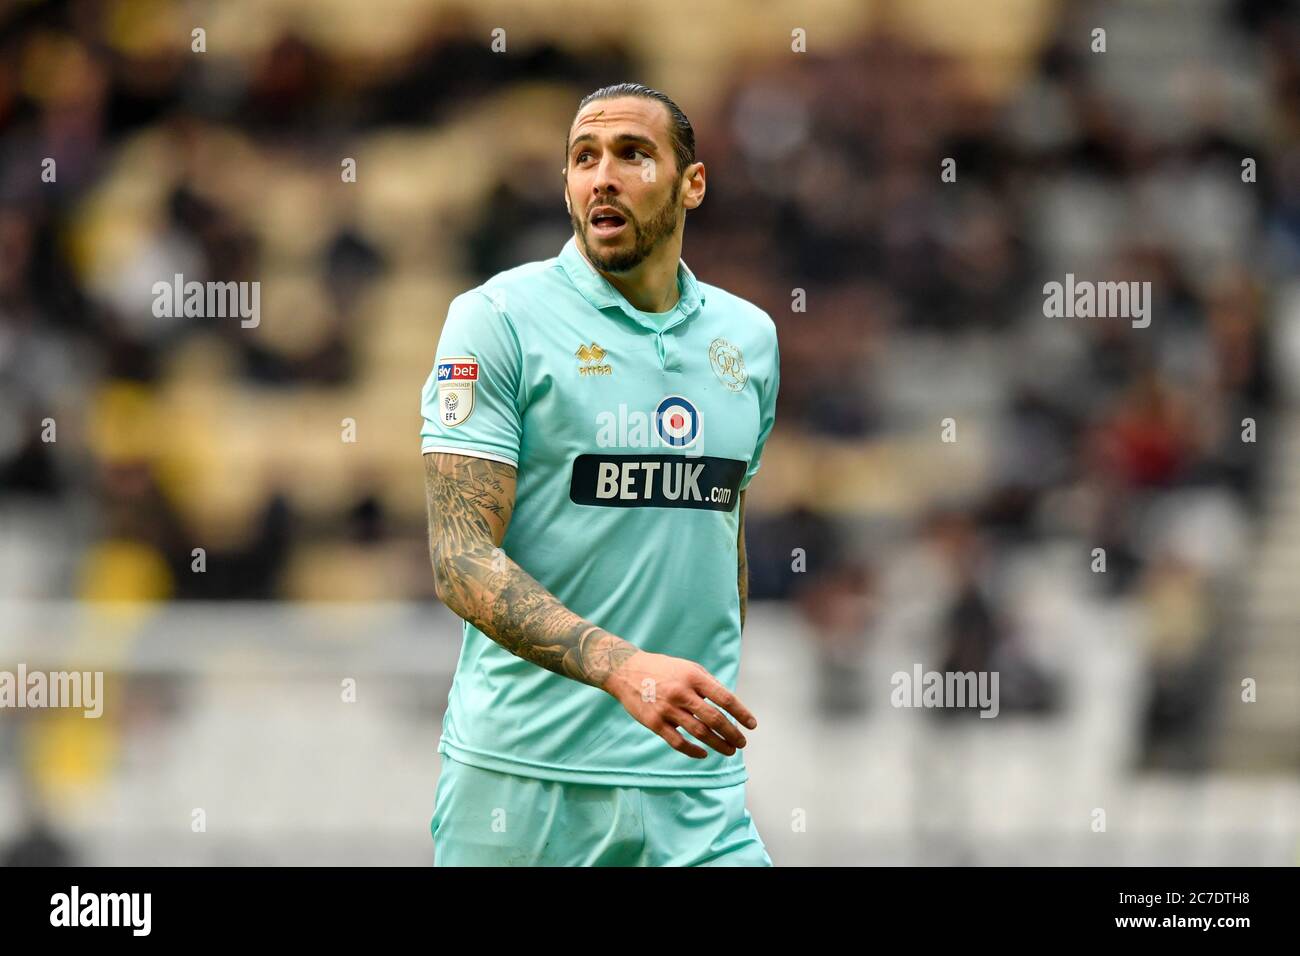 7th March 2020, Deepdale, Preston, England; Sky Bet Championship, Preston North End v Queens Park Rangers : Geoff Cameron (5) of Queens Park Rangers leaves the pitch after receiving a second yellow card in the game Stock Photo